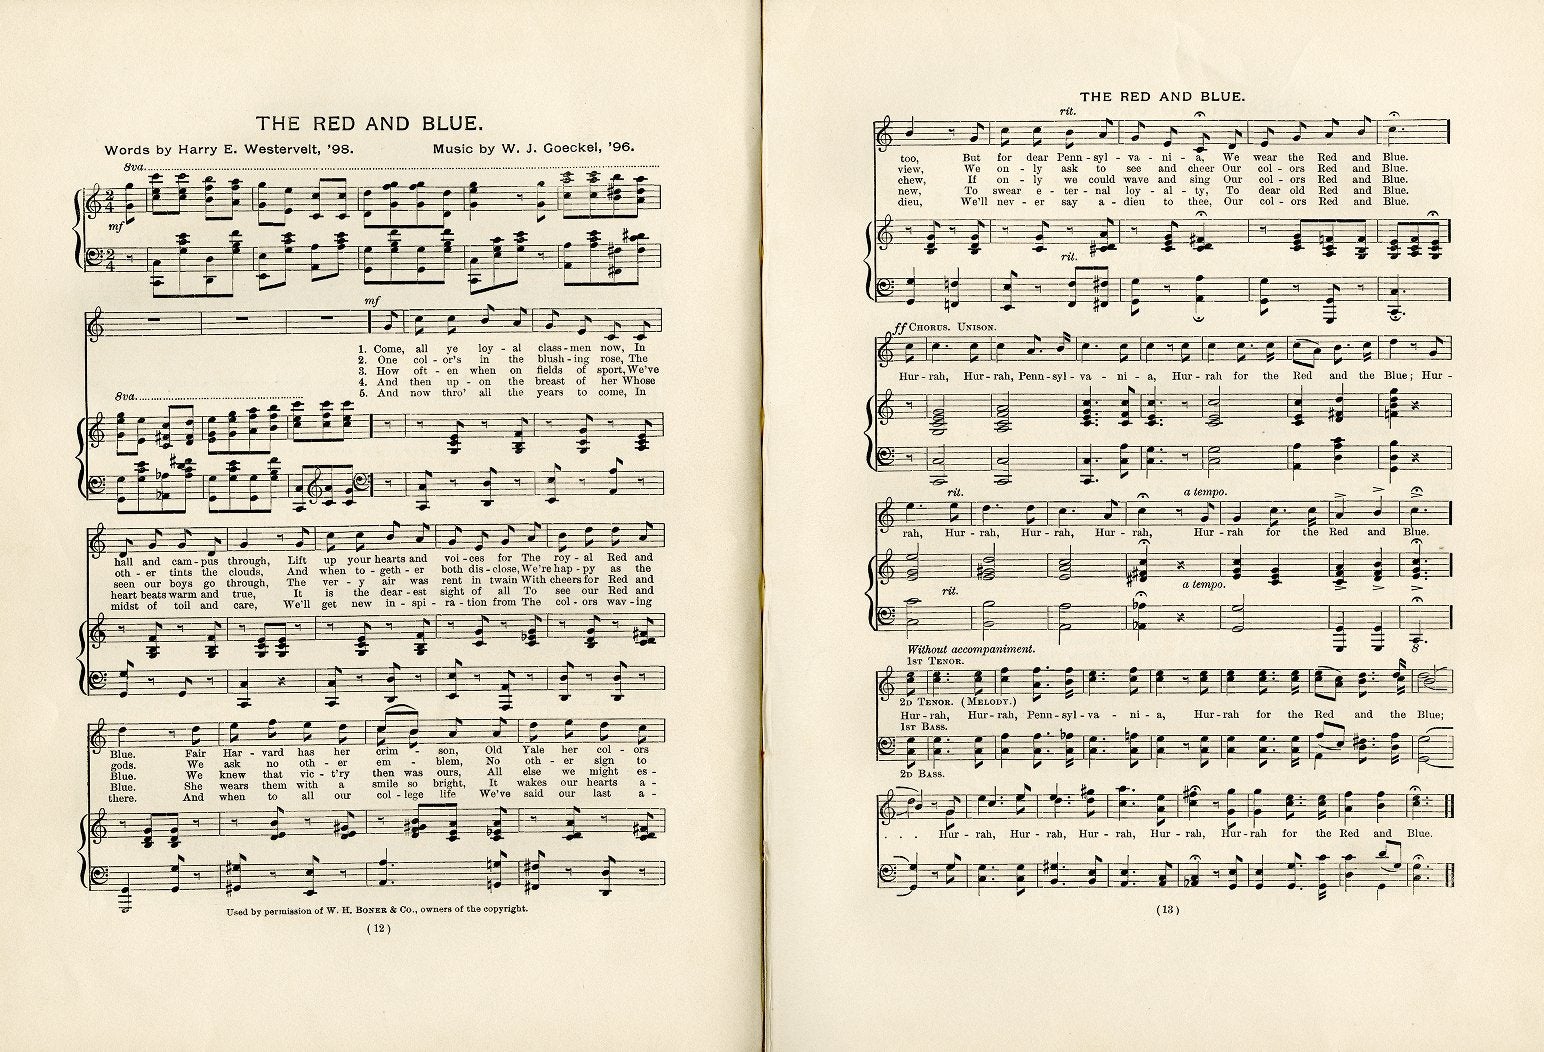 "The Red and Blue," music and lyrics